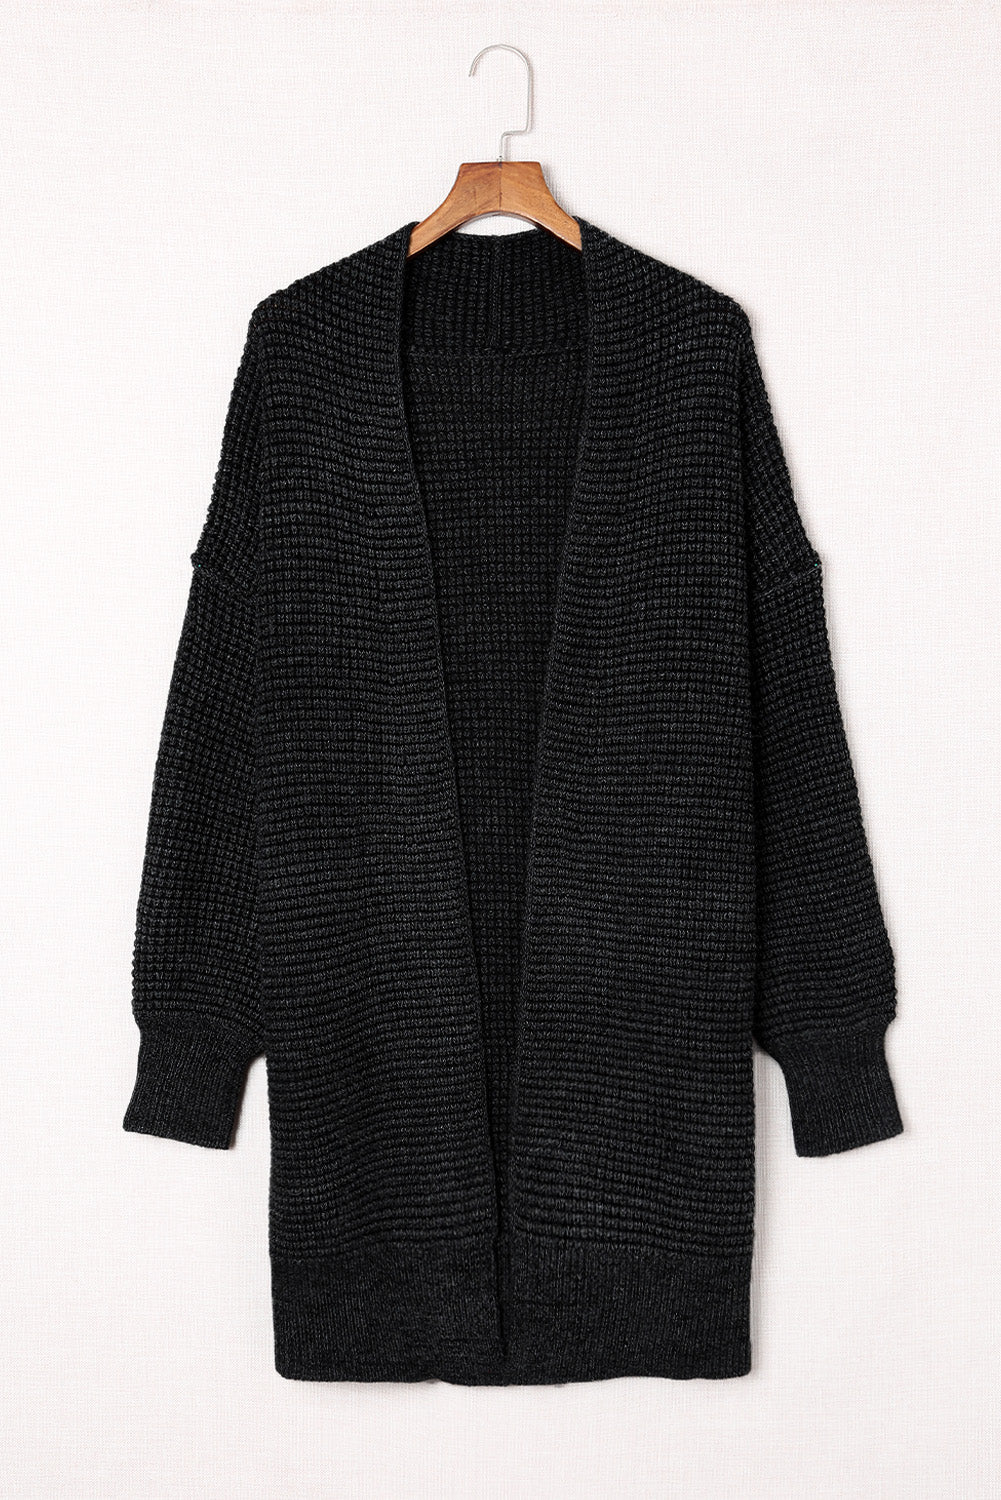 Heathered Open Front Longline Cardigan - Black / S Apparel & Accessories Wynter 4 All Seasons